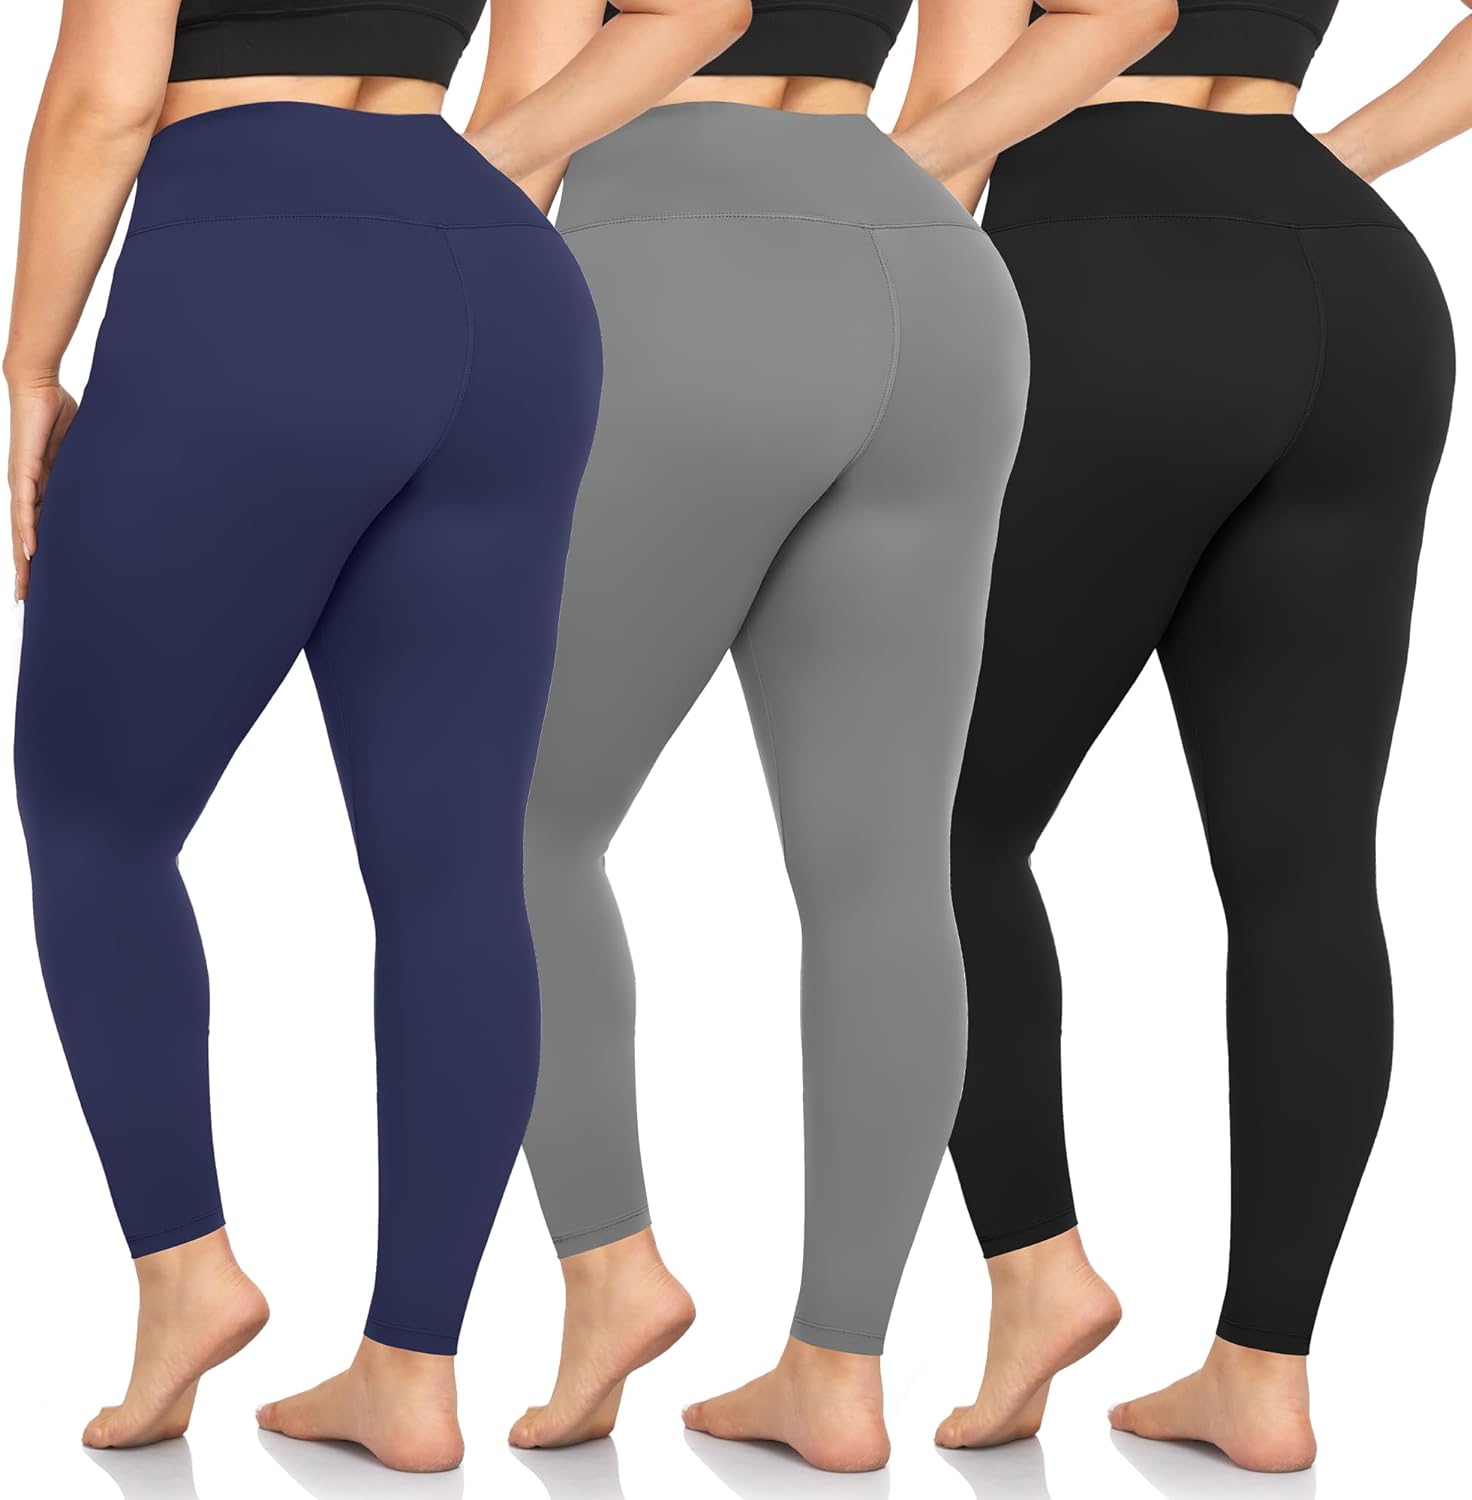 we fleece 3 Pack Plus Size Leggings for Women -Stretchy X-Large-4X Tummy Control High Waist Spandex Workout Yoga Pants